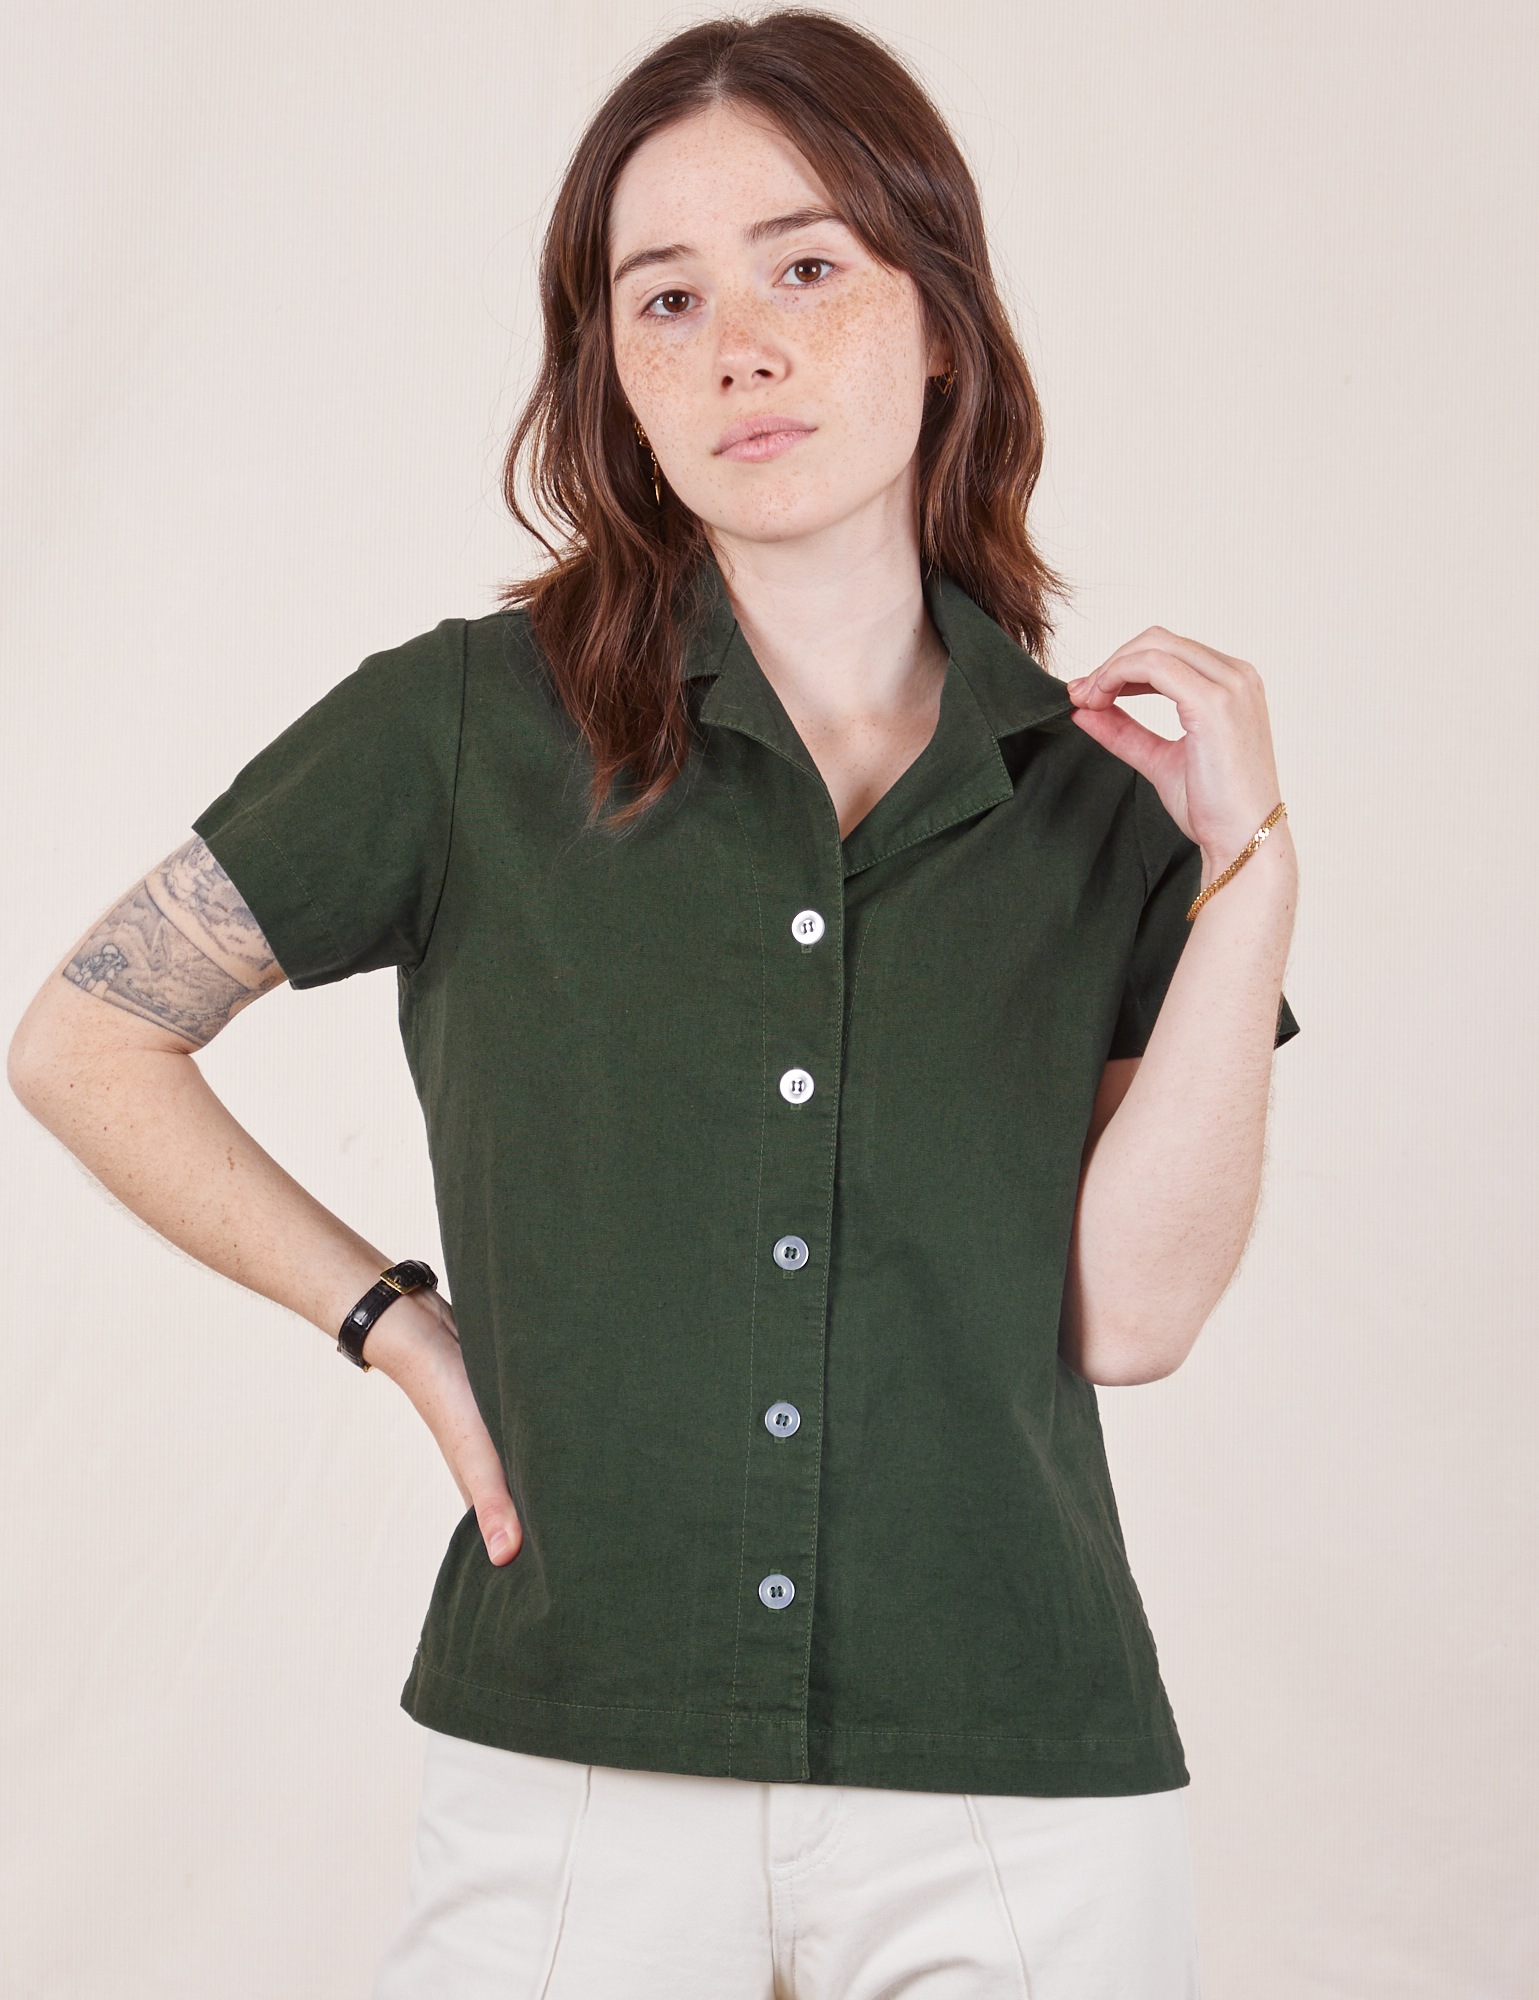 Hana is 5&#39;3&quot; and wearing P Pantry Button-Up in Swamp Green